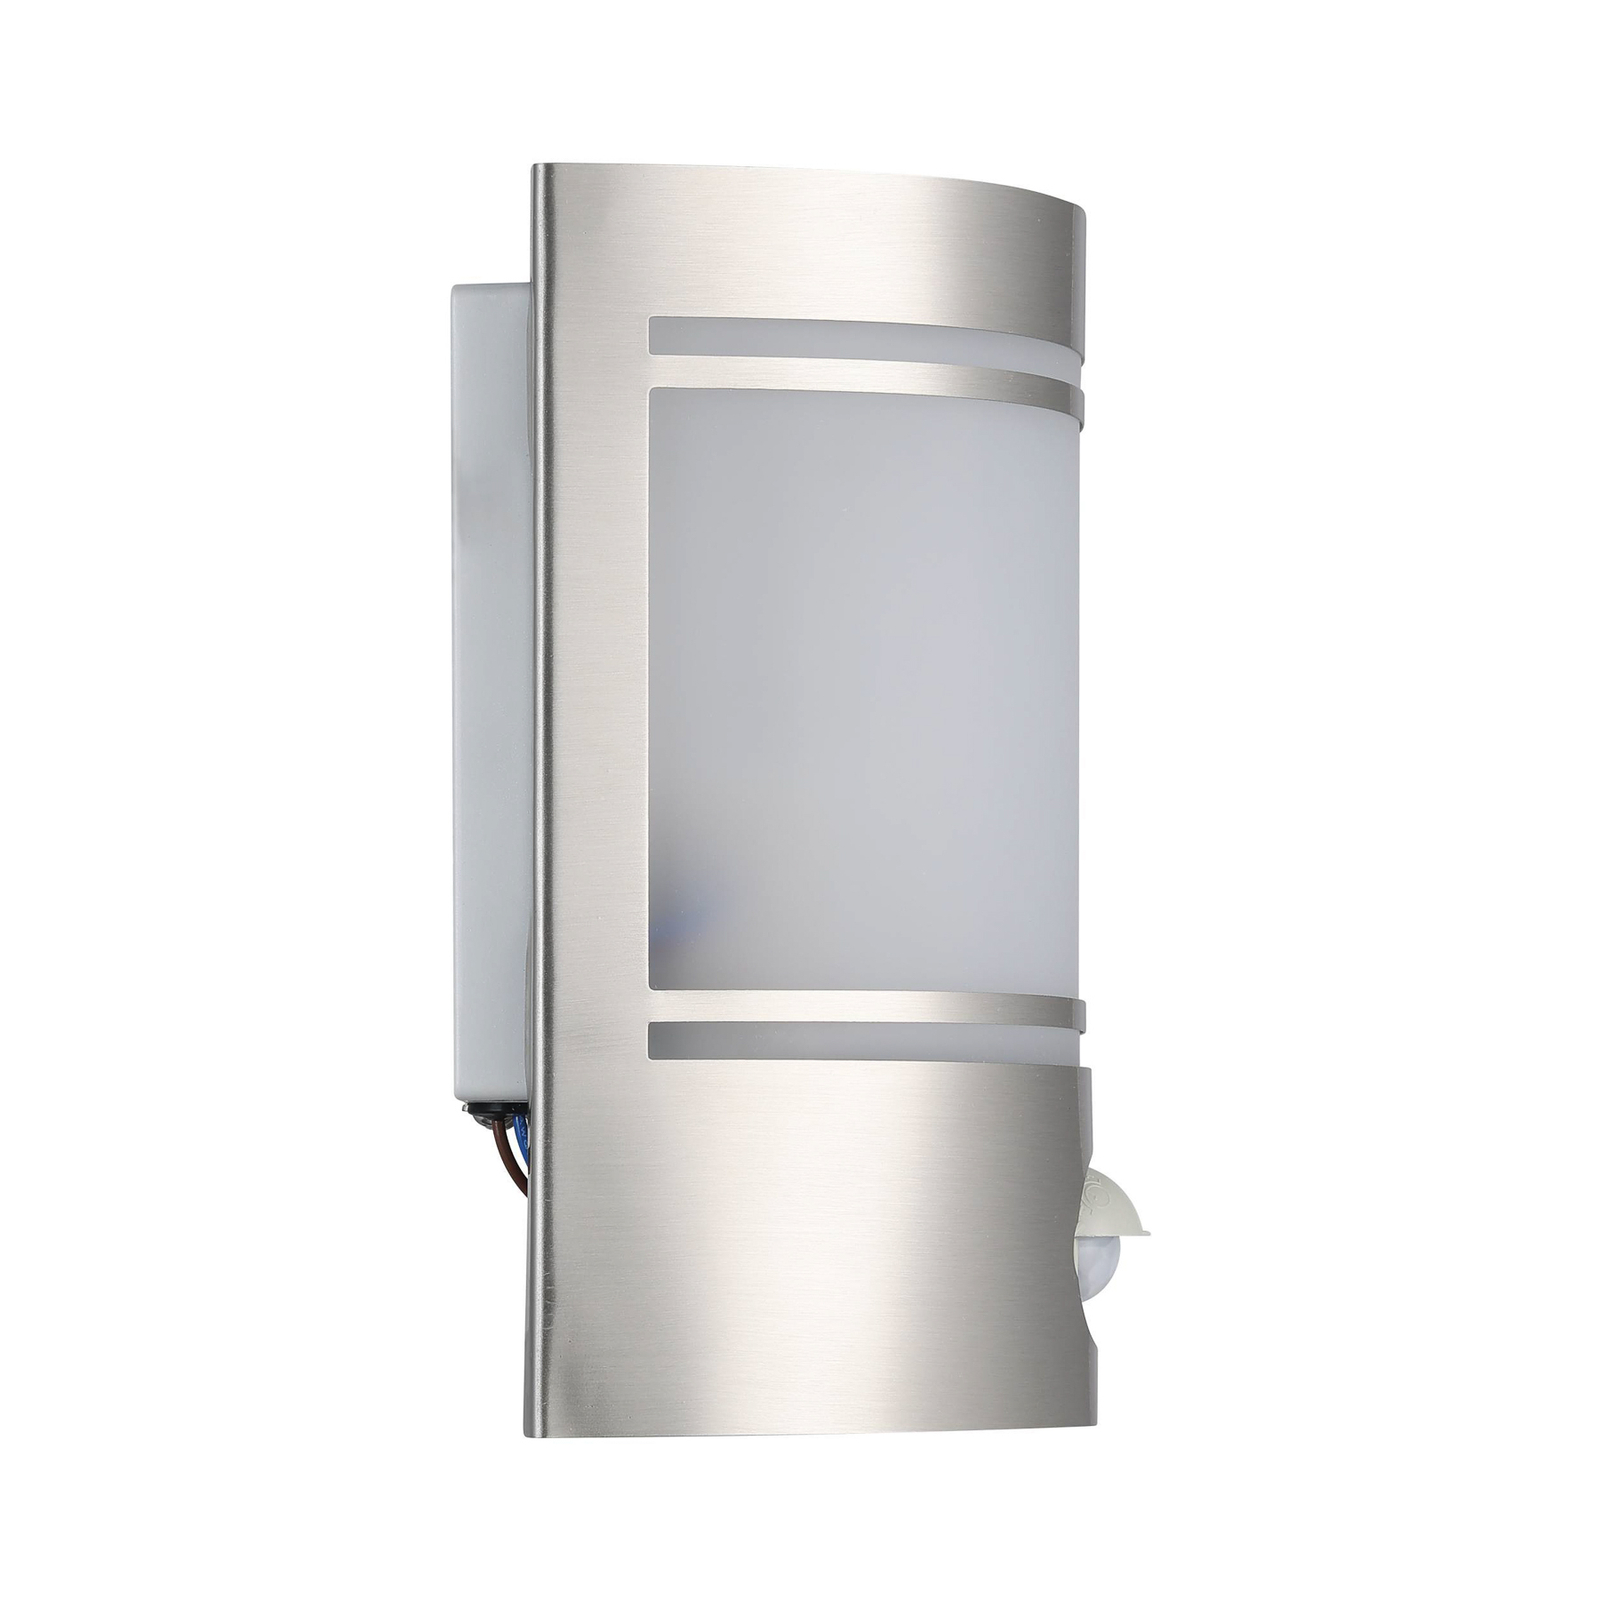 Cerno outdoor wall lamp, sensor, stainless steel